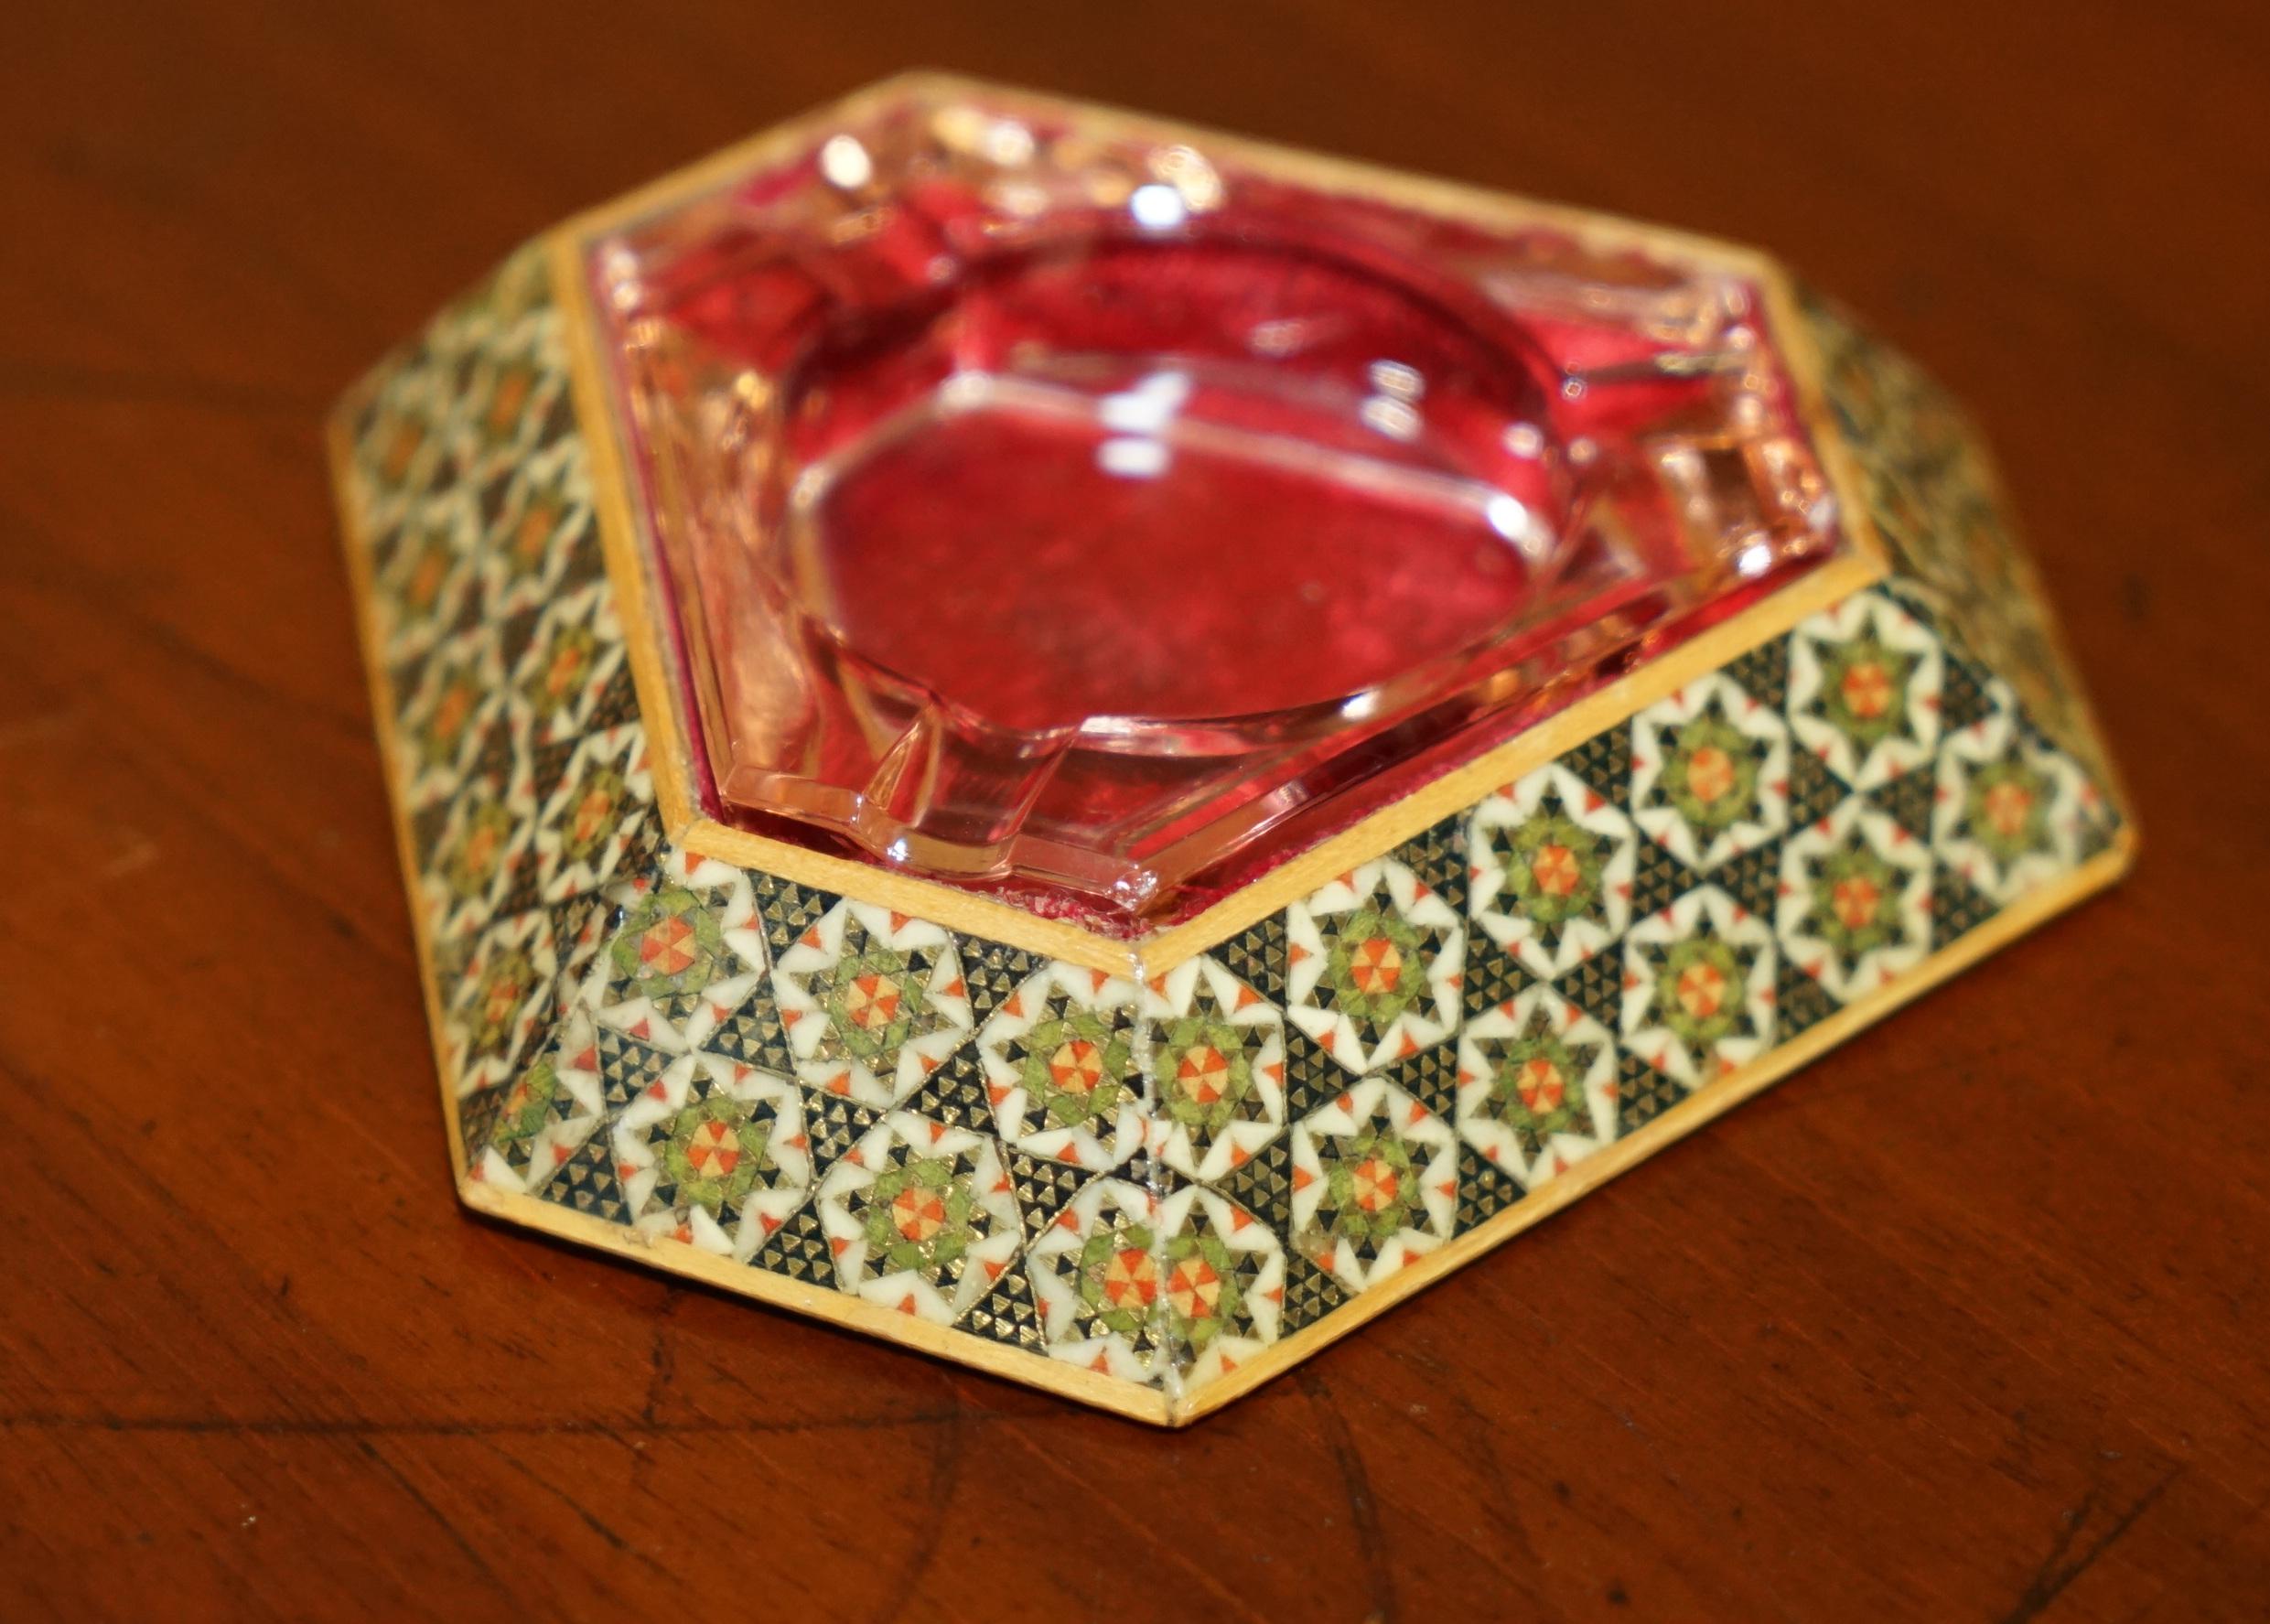 ANTIQUE PERSIAN ASHTRAY WiTH CRANBERRY GLASS TRIANGLE INTERNAL TRAY (Europäisch) im Angebot